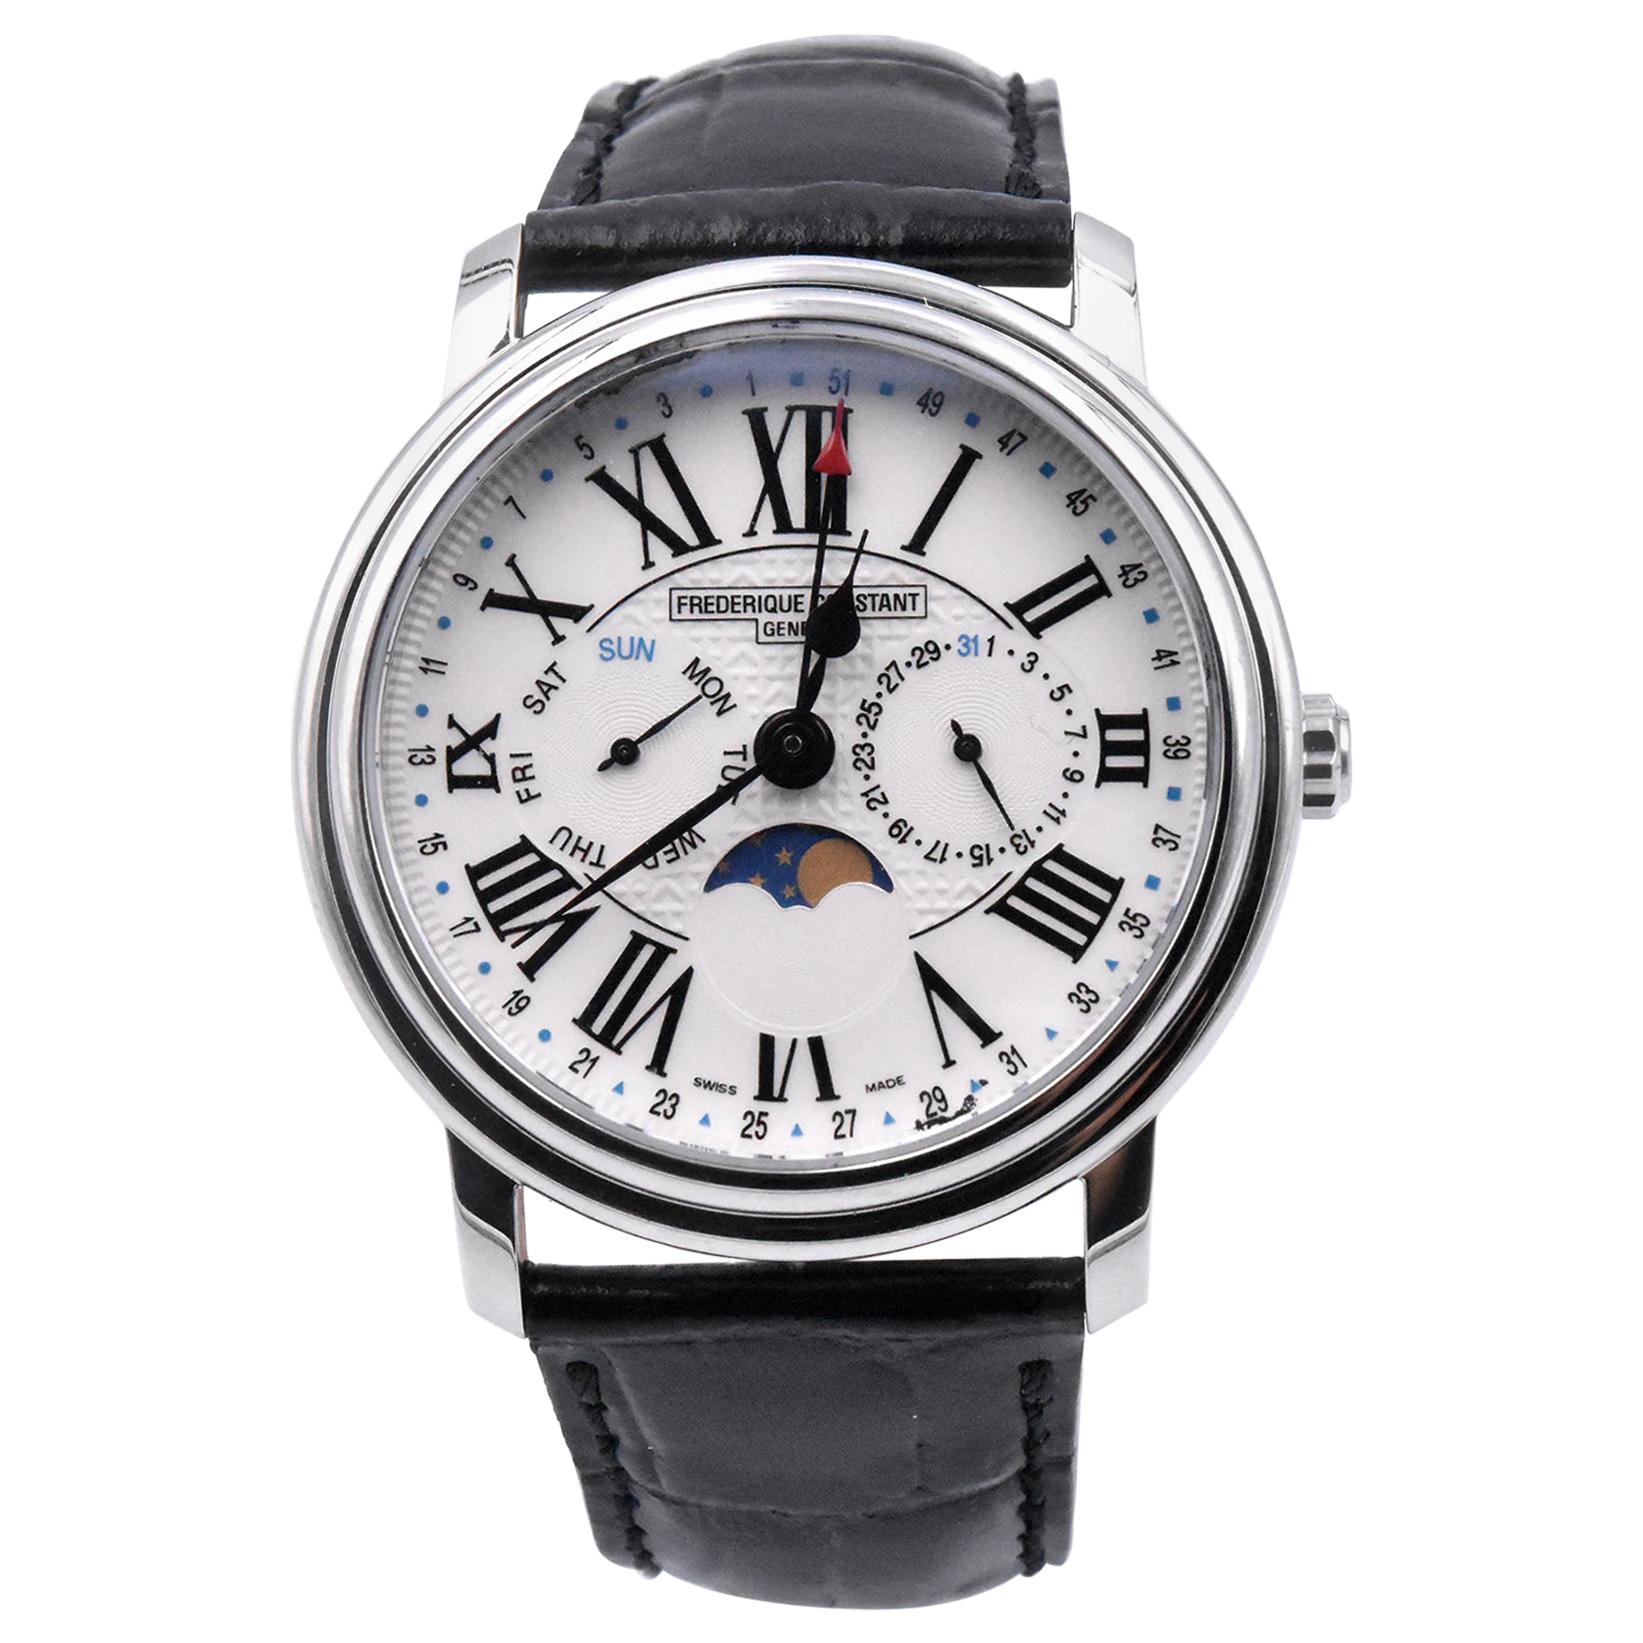 Frederique Constant Stainless Steel Moonphase Calendar Automatic